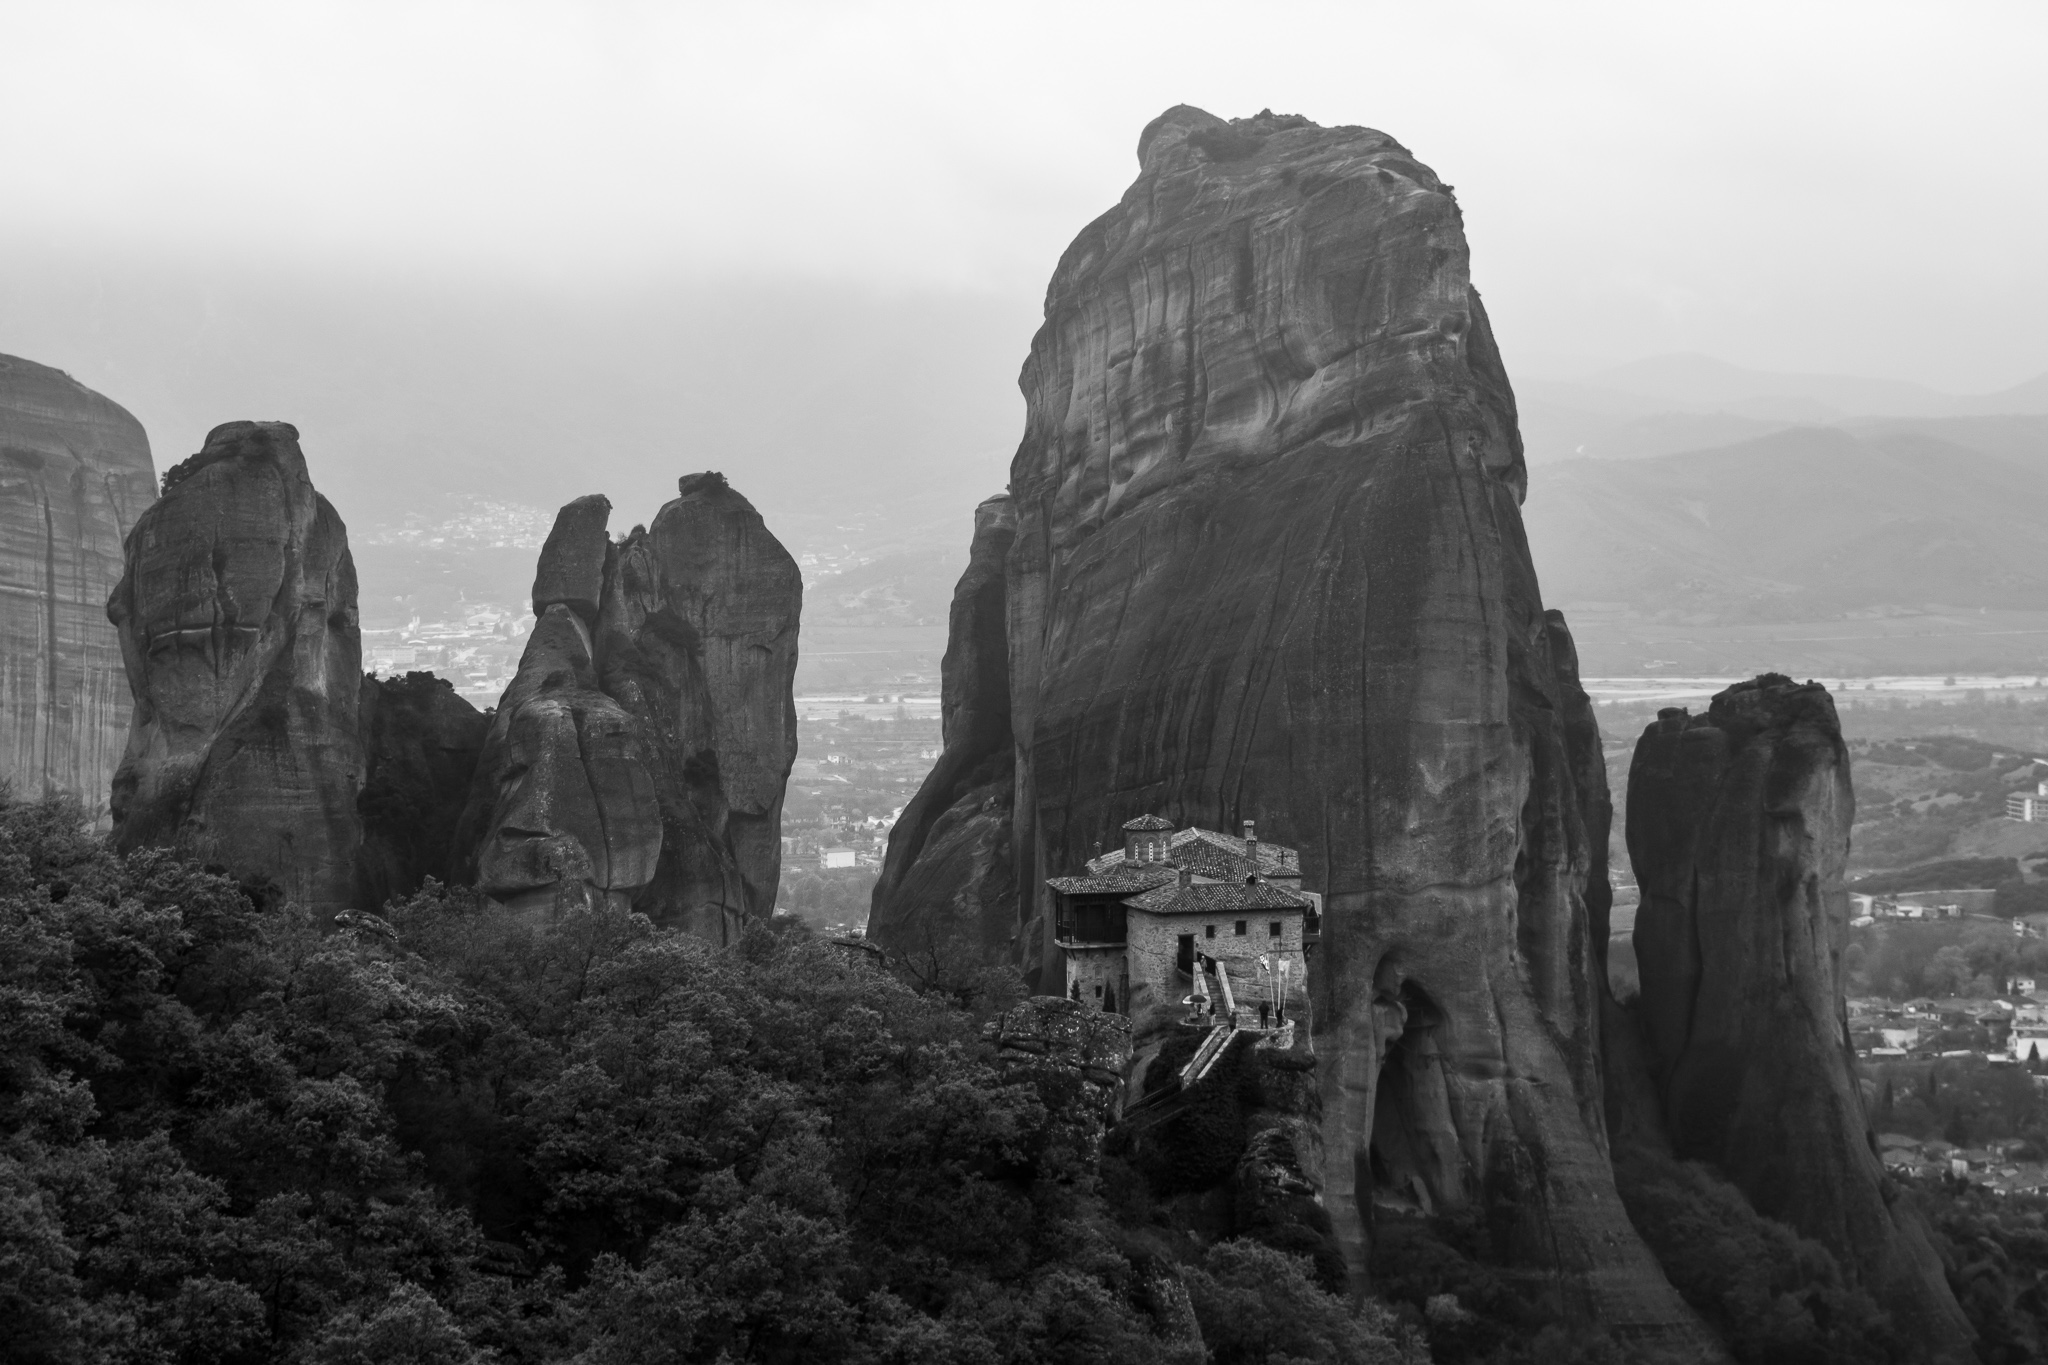 The Meteora Monasteries or Meteors are located in the Thessaly Plain, near the town of Kalambaka, "suspended in the sky" over sandstone cliffs. <br>Founded by the hermit Athanasios, classified in 1988 as a World Heritage Site, this group of twenty-four monastic centers, dating from the 14th century, contemplates the passage of time from its heavenly height.